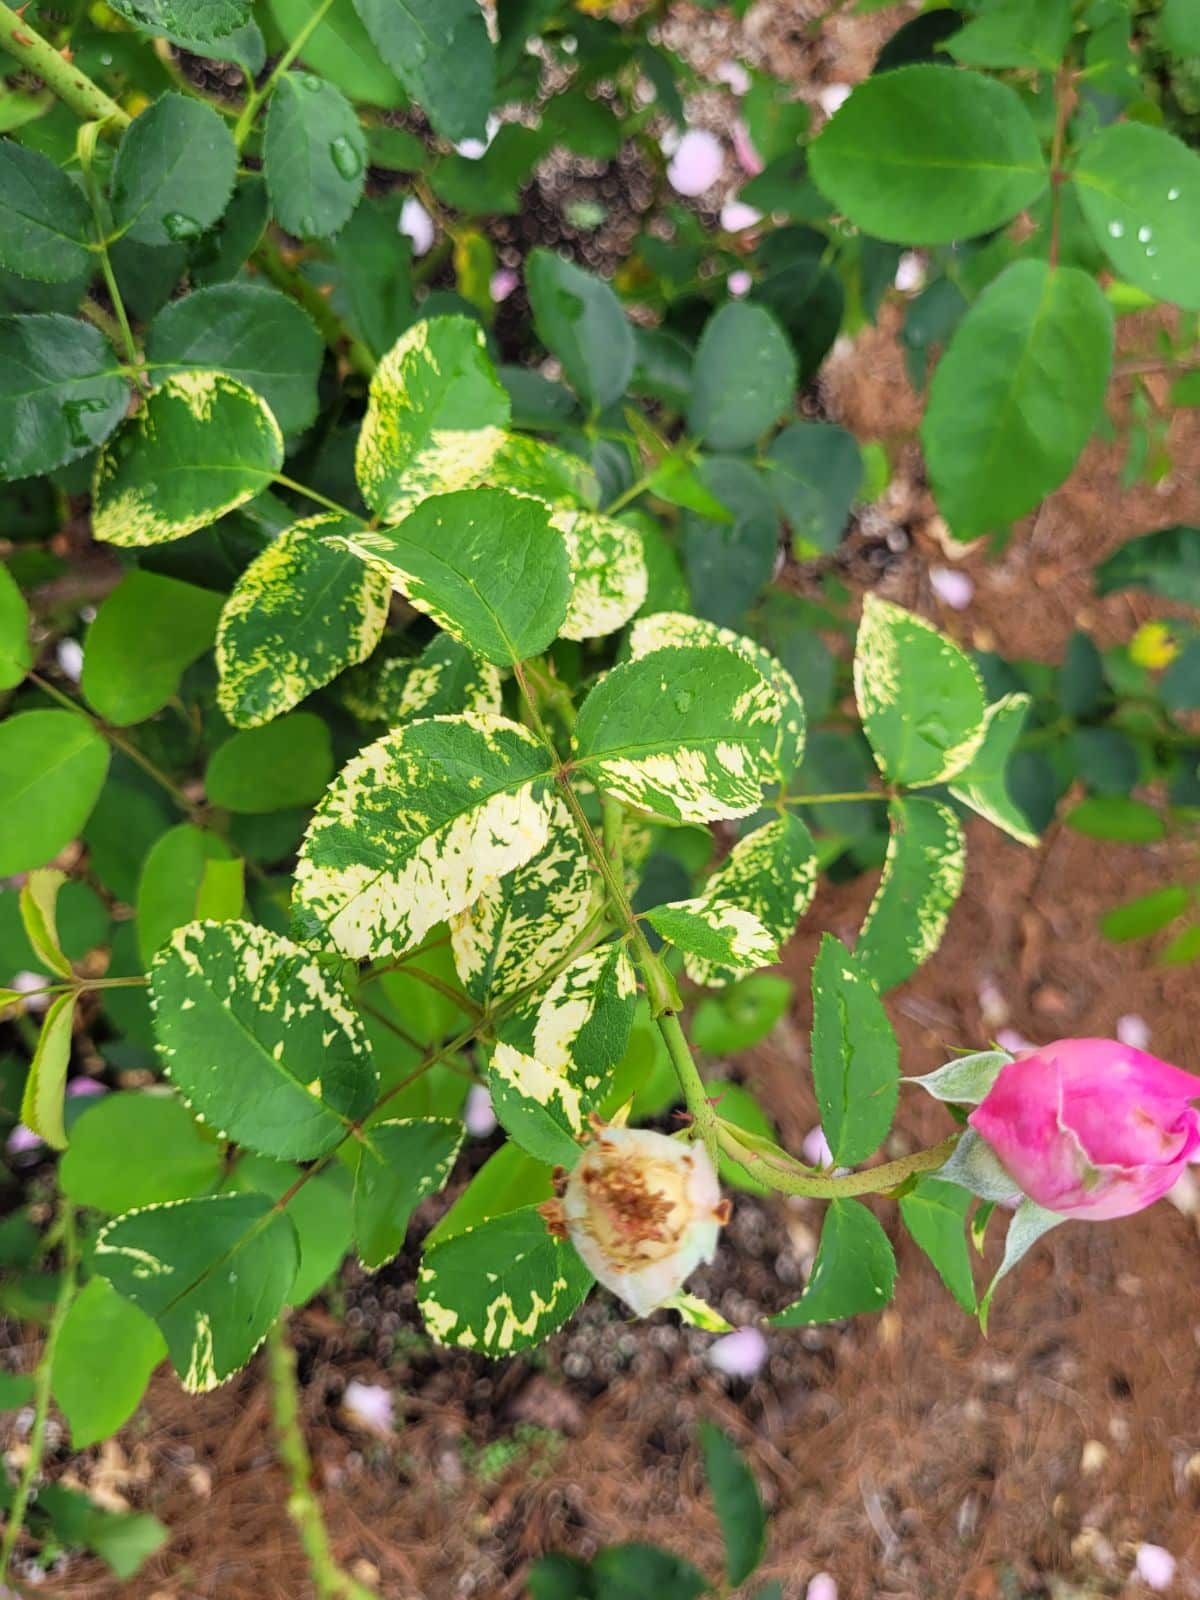 A rose with mosaic virus